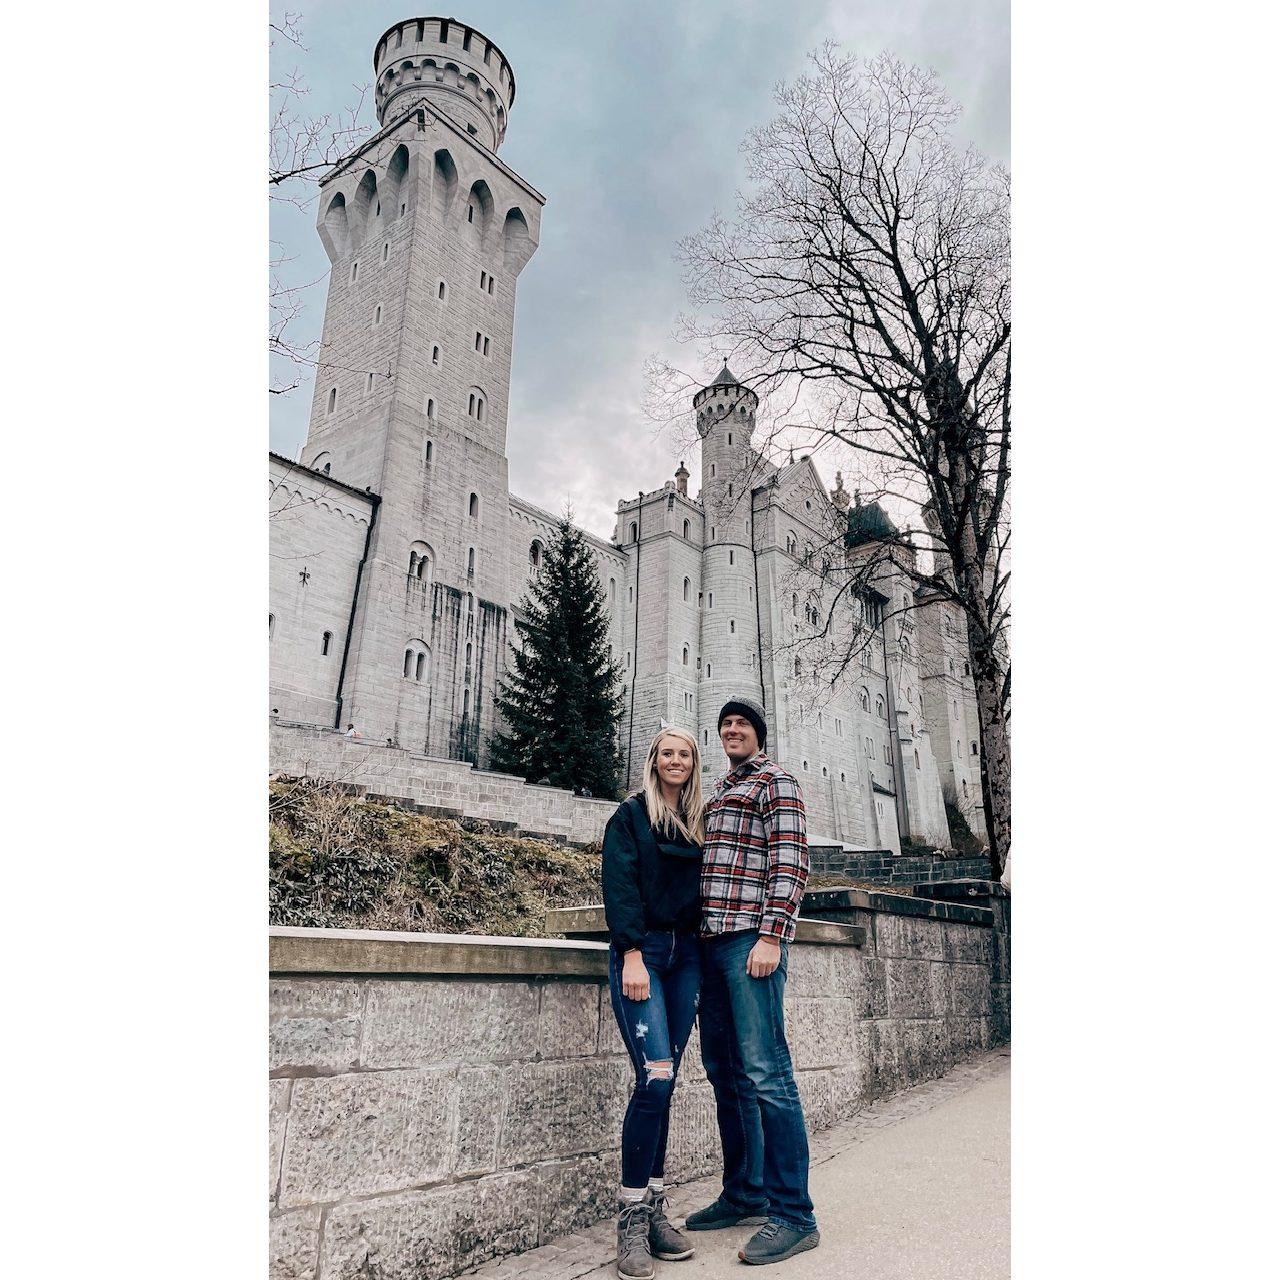 The first of many adventures together, exploring the Neuschwanstein Castle.